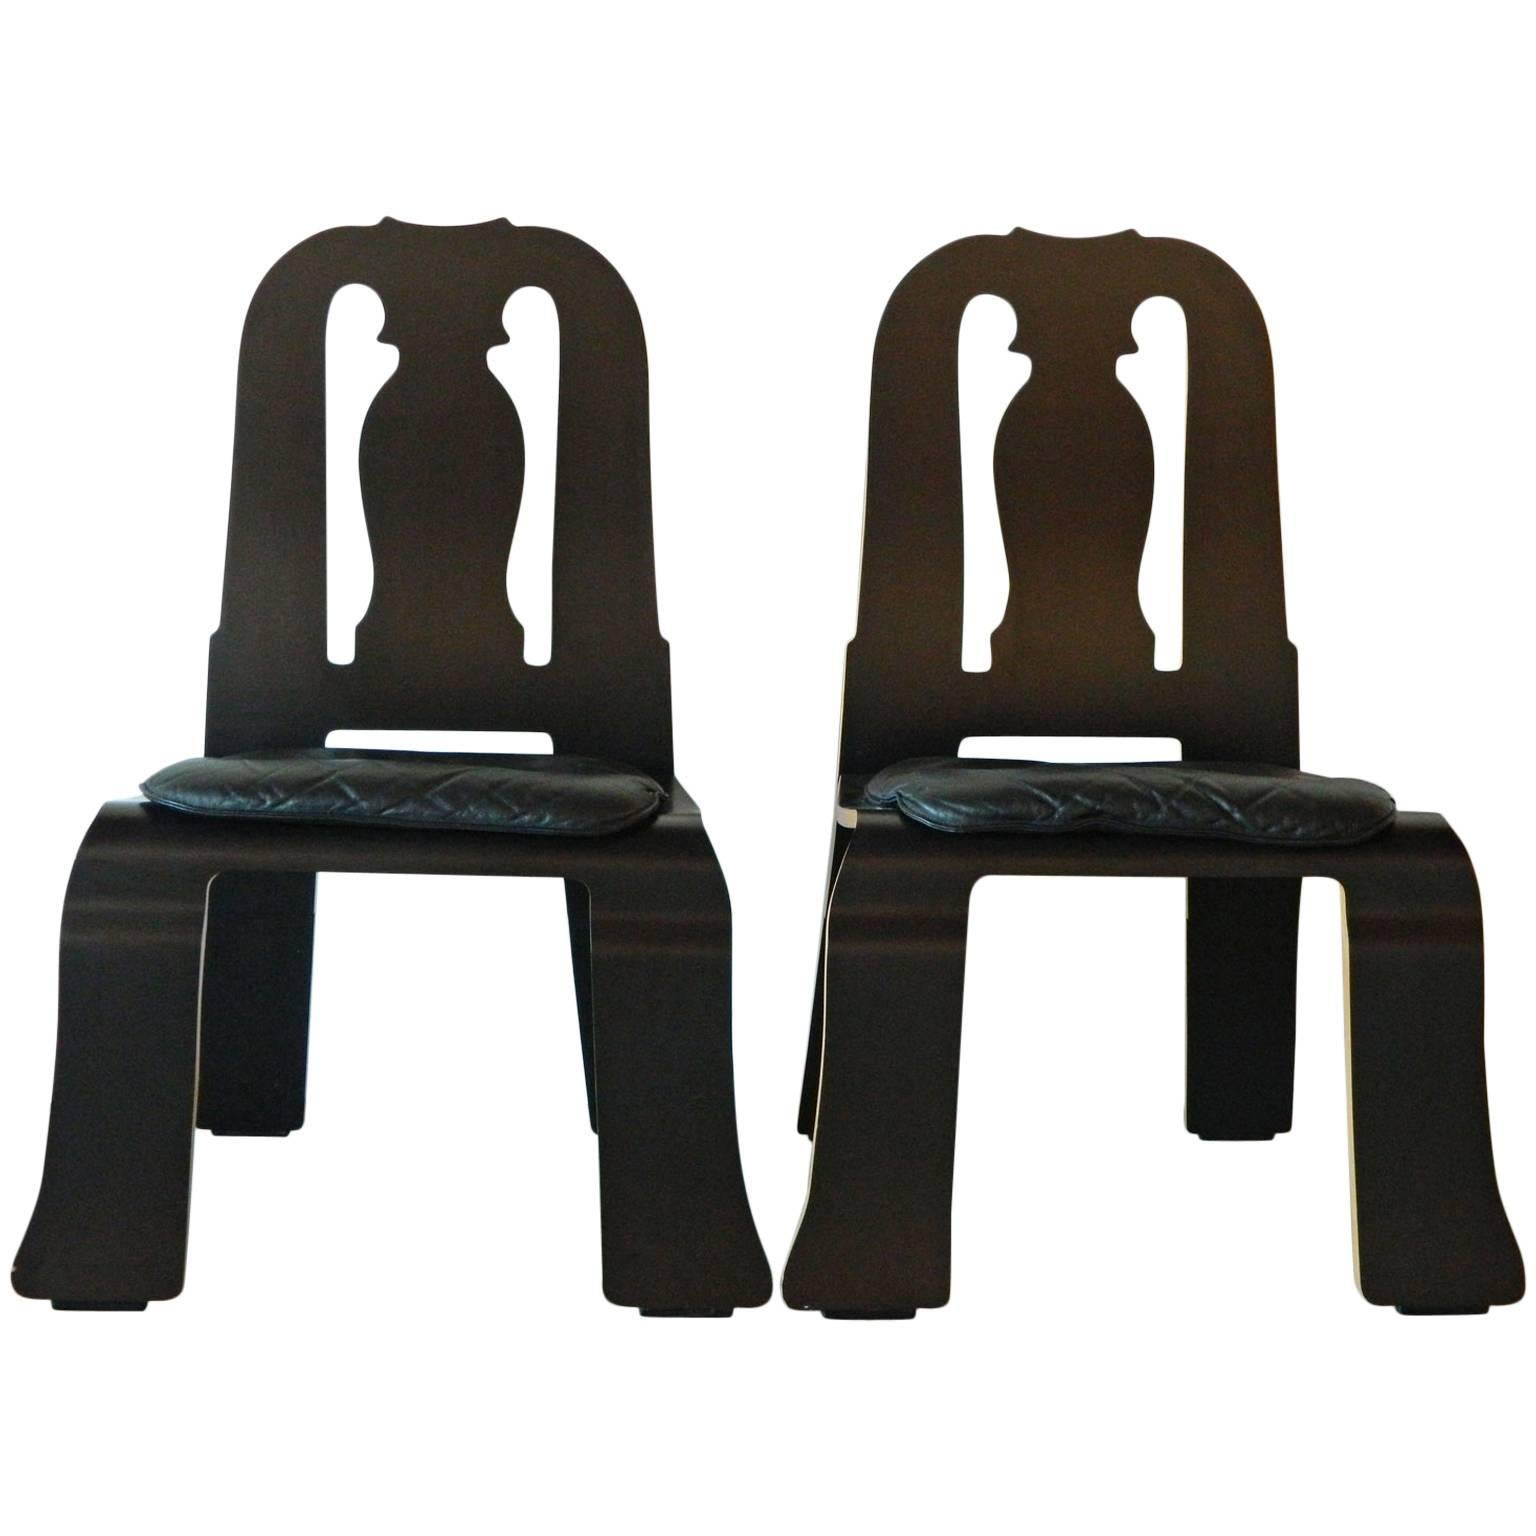 Pair of Queen Anne Chairs by Robert Venturi for Knoll